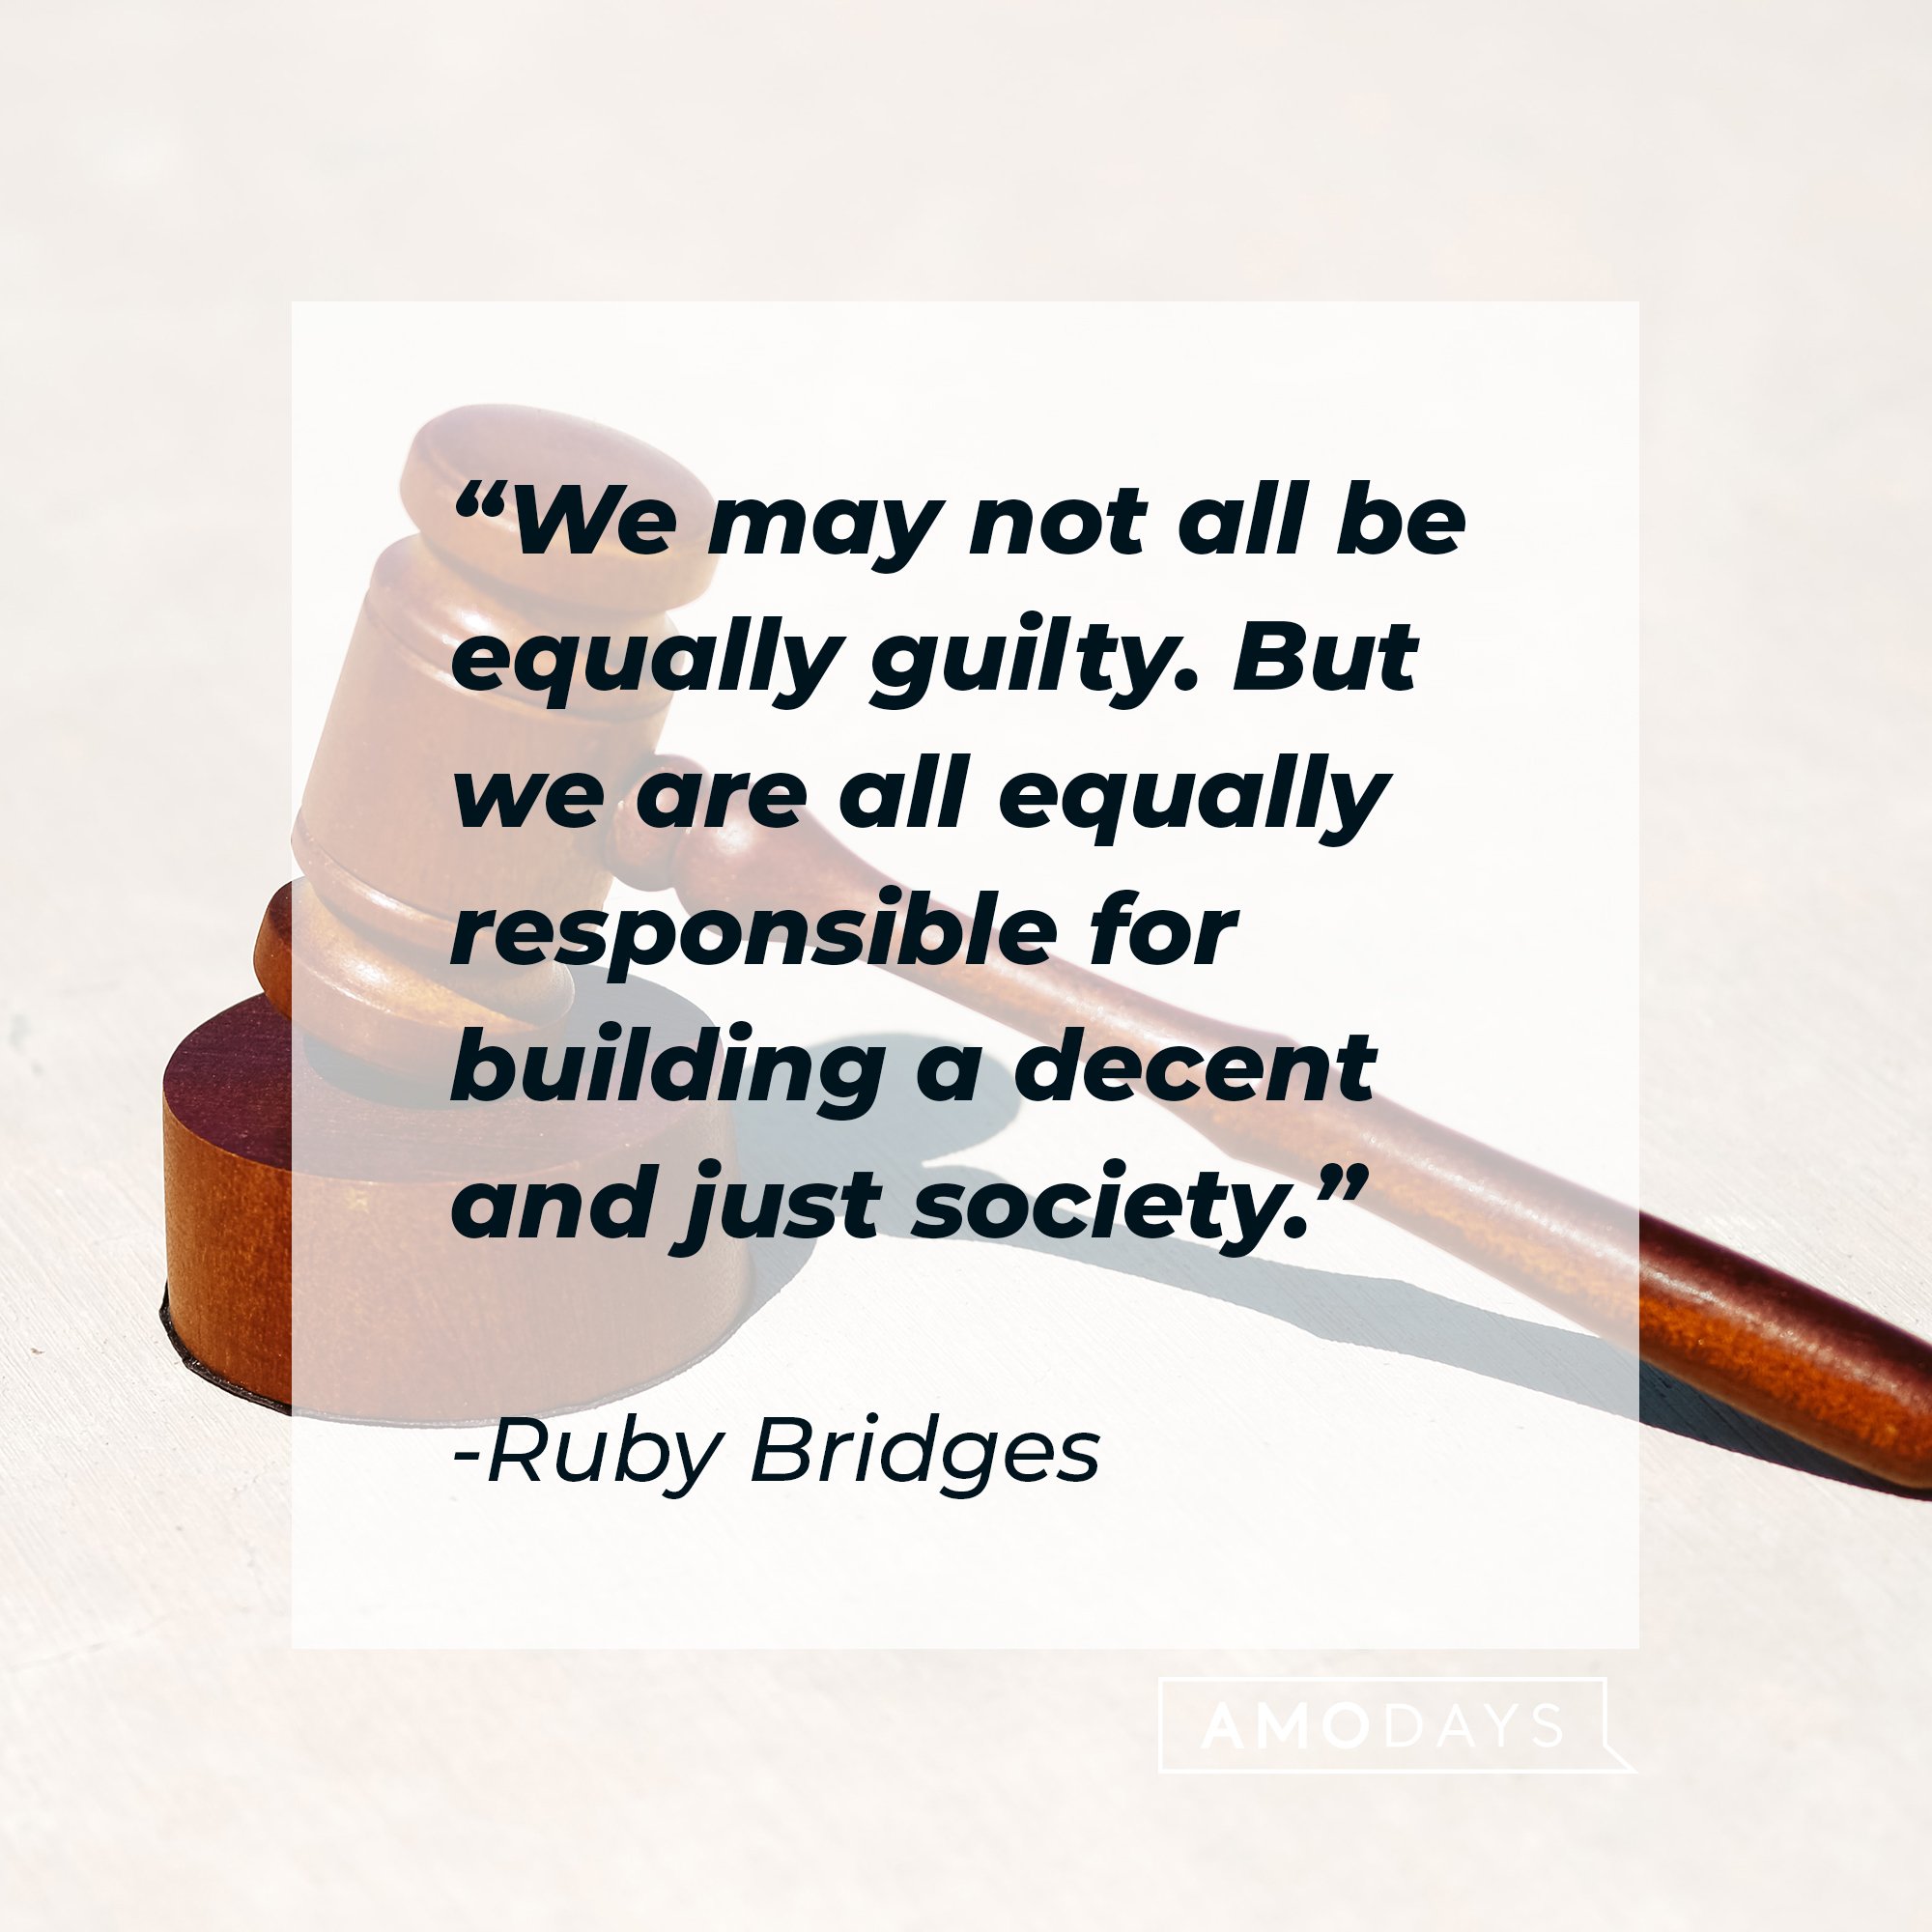 Ruby Bridges’ quotes: “We may not all be equally guilty. But we are all equally responsible for building a decent and just society.” | Image: AmoDays 